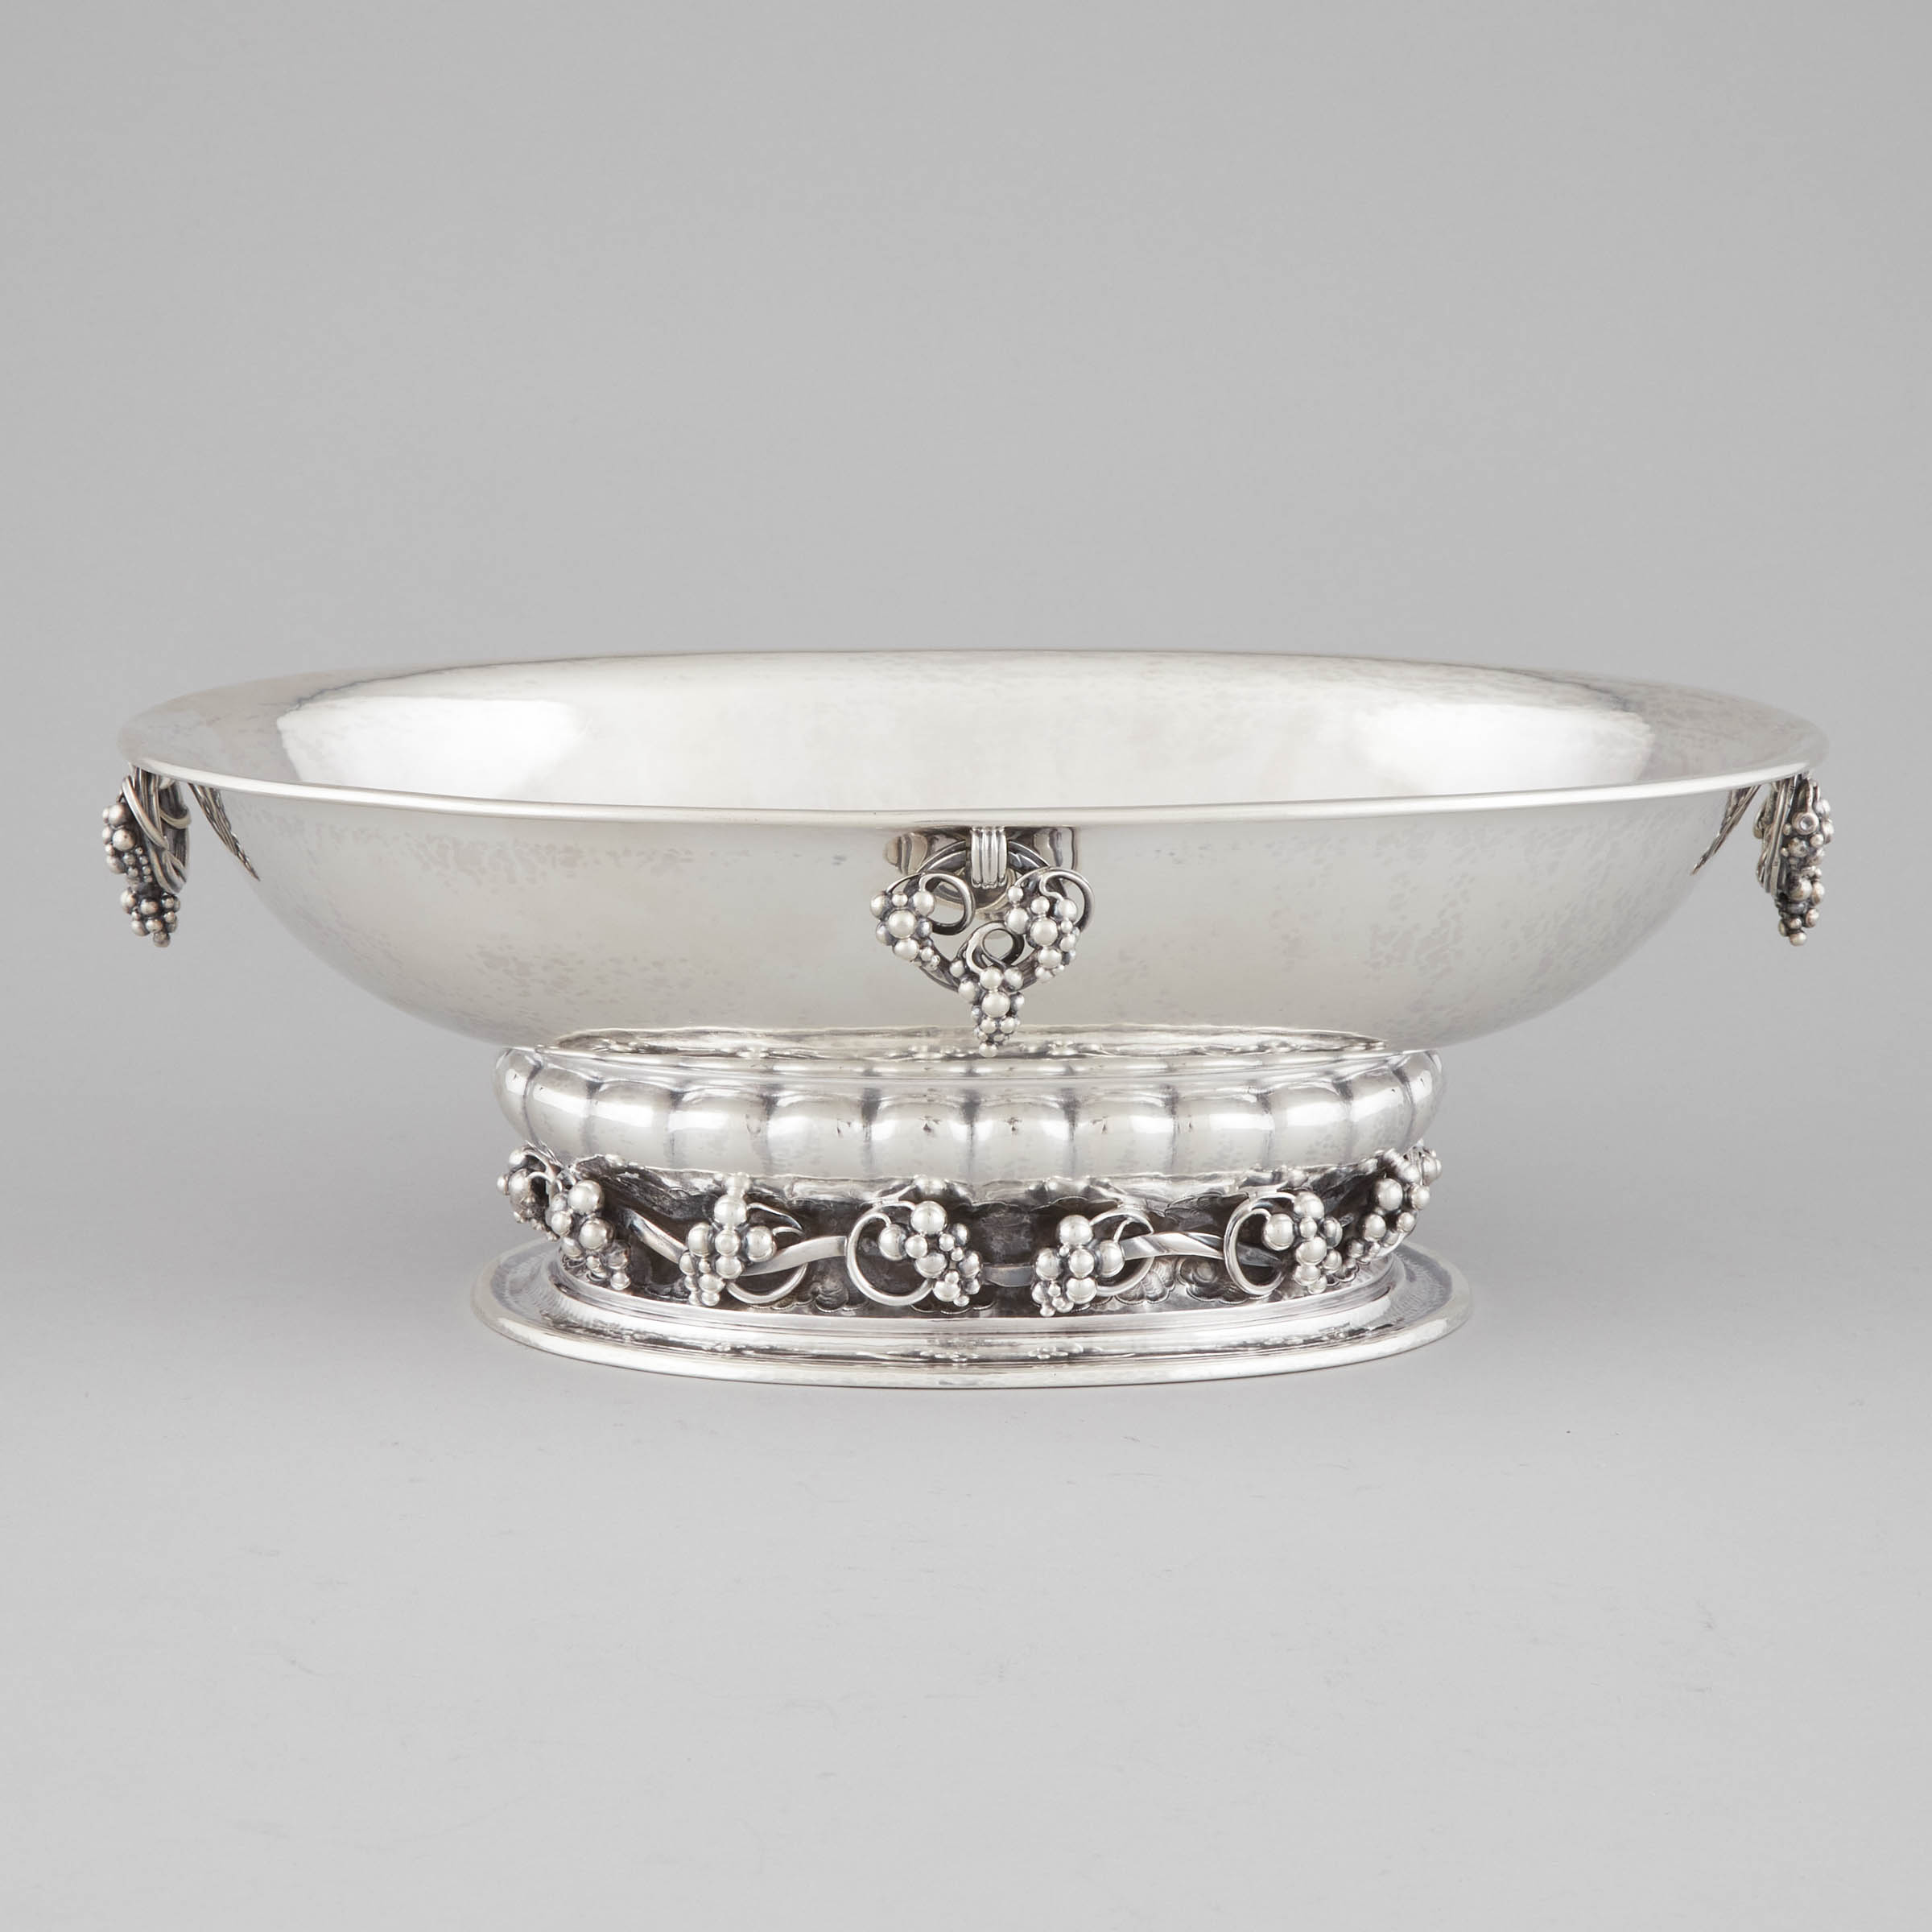 Danish Silver Oval Footed Centrepiece